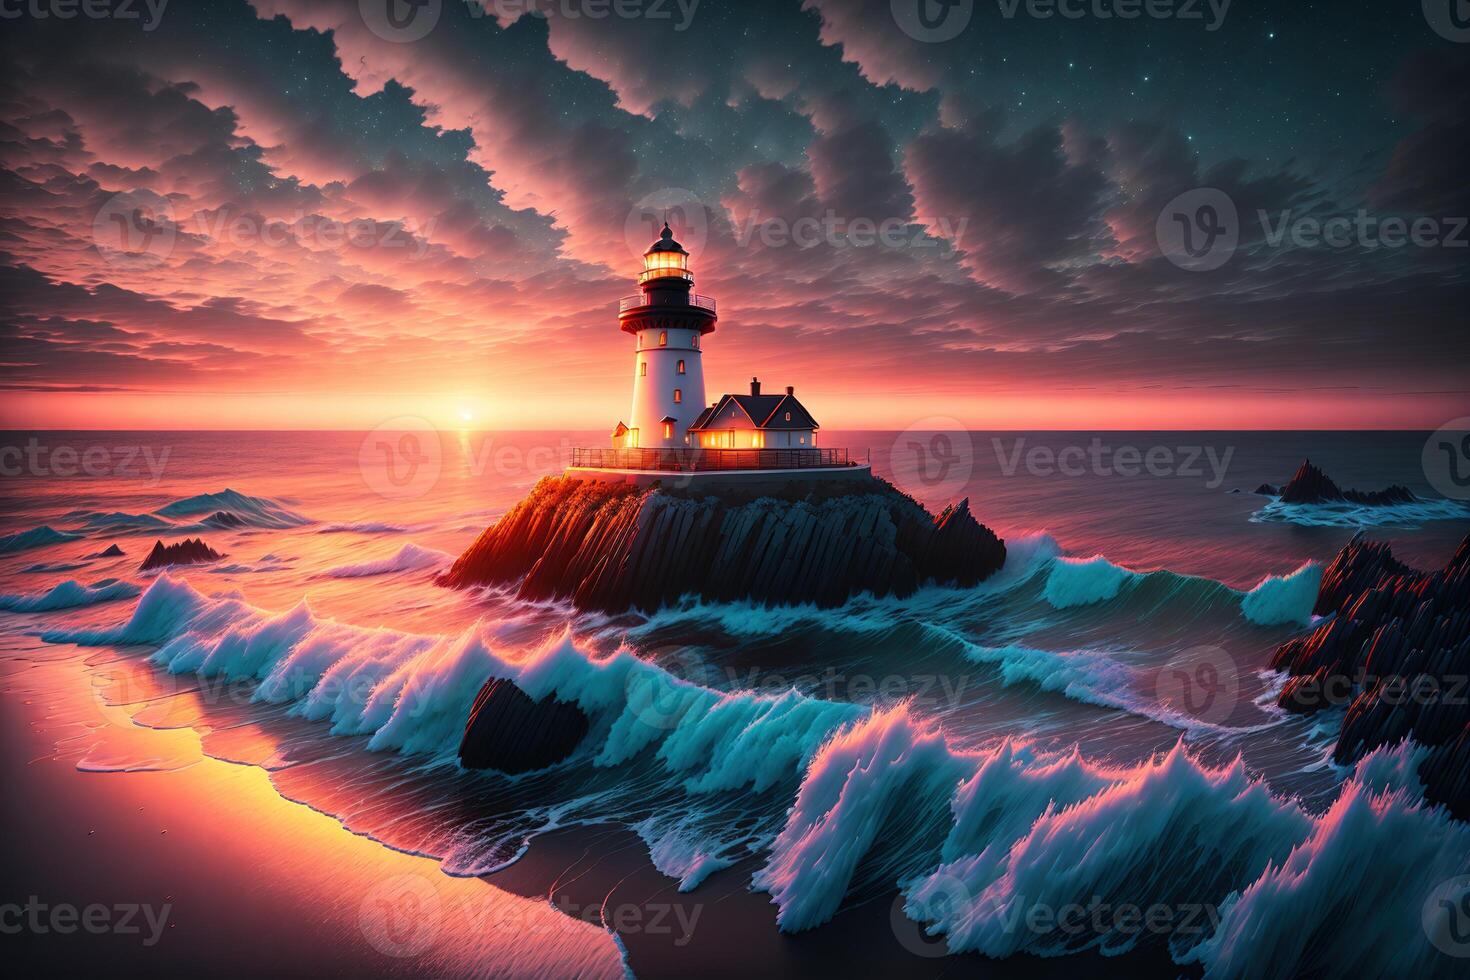 Beautiful lighthouse adorned nighttime seascape with a gloomy sky at sunset by photo